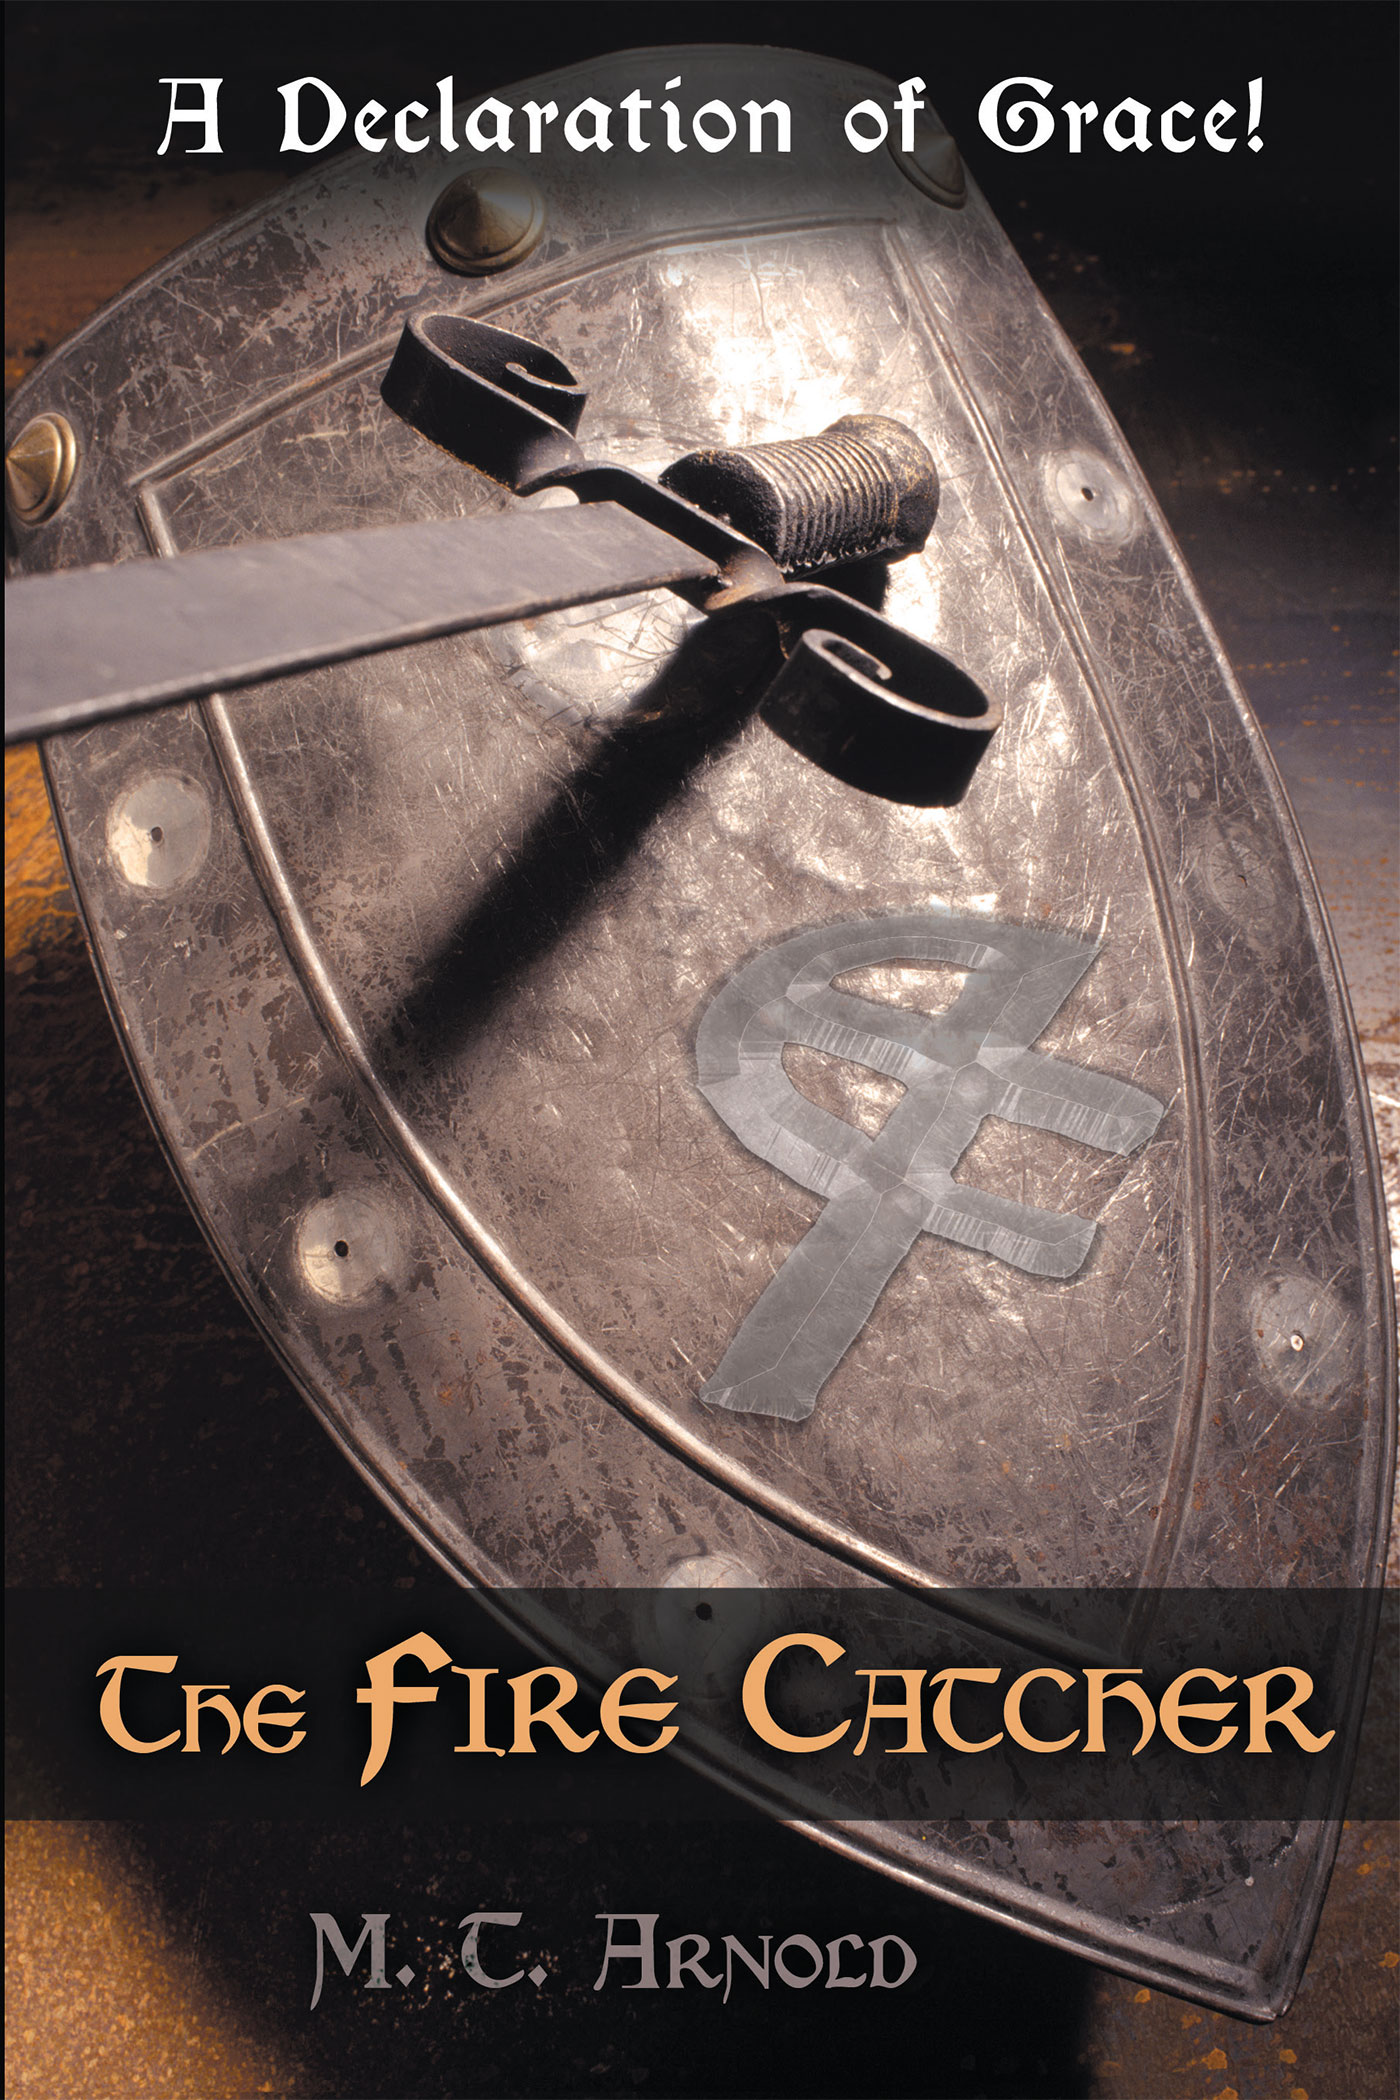 The Fire Catcher by M. T. Arnold